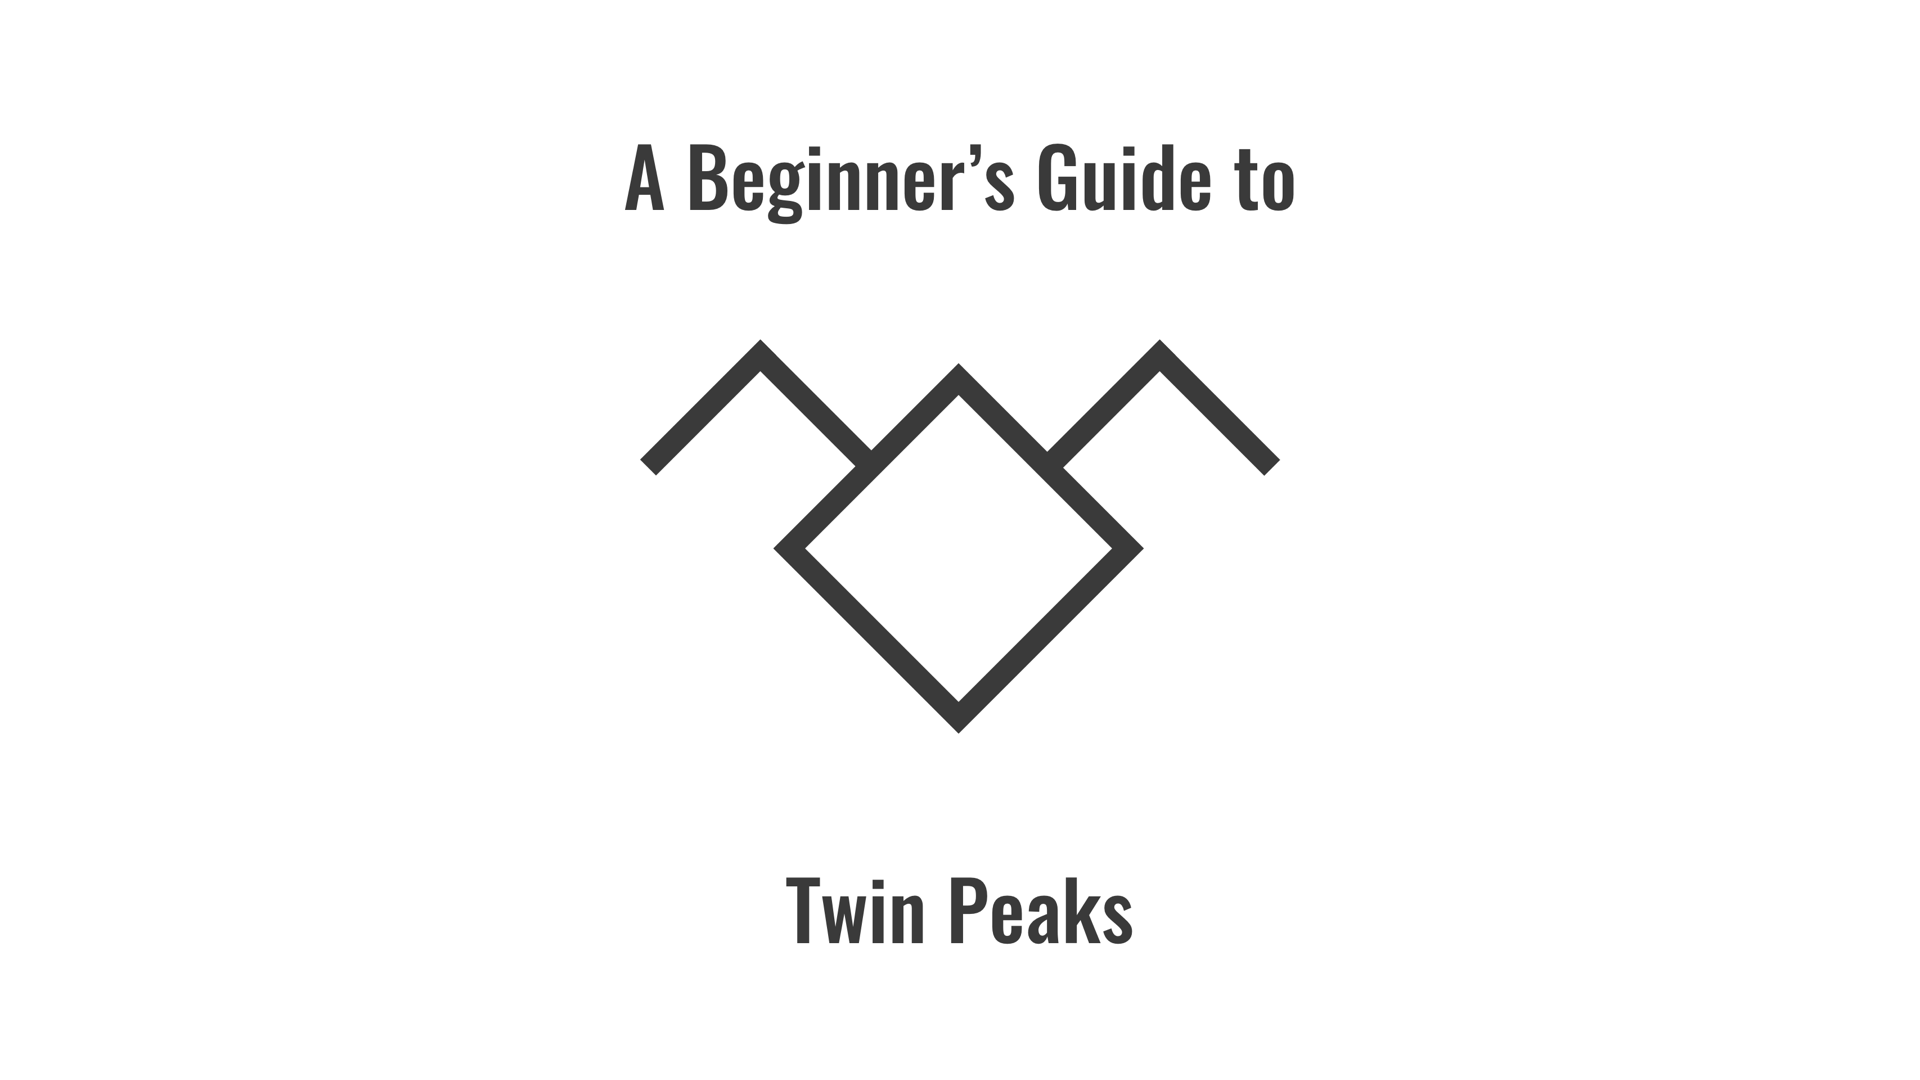 Twin Peaks Beginner’s Guide with Owl Logo